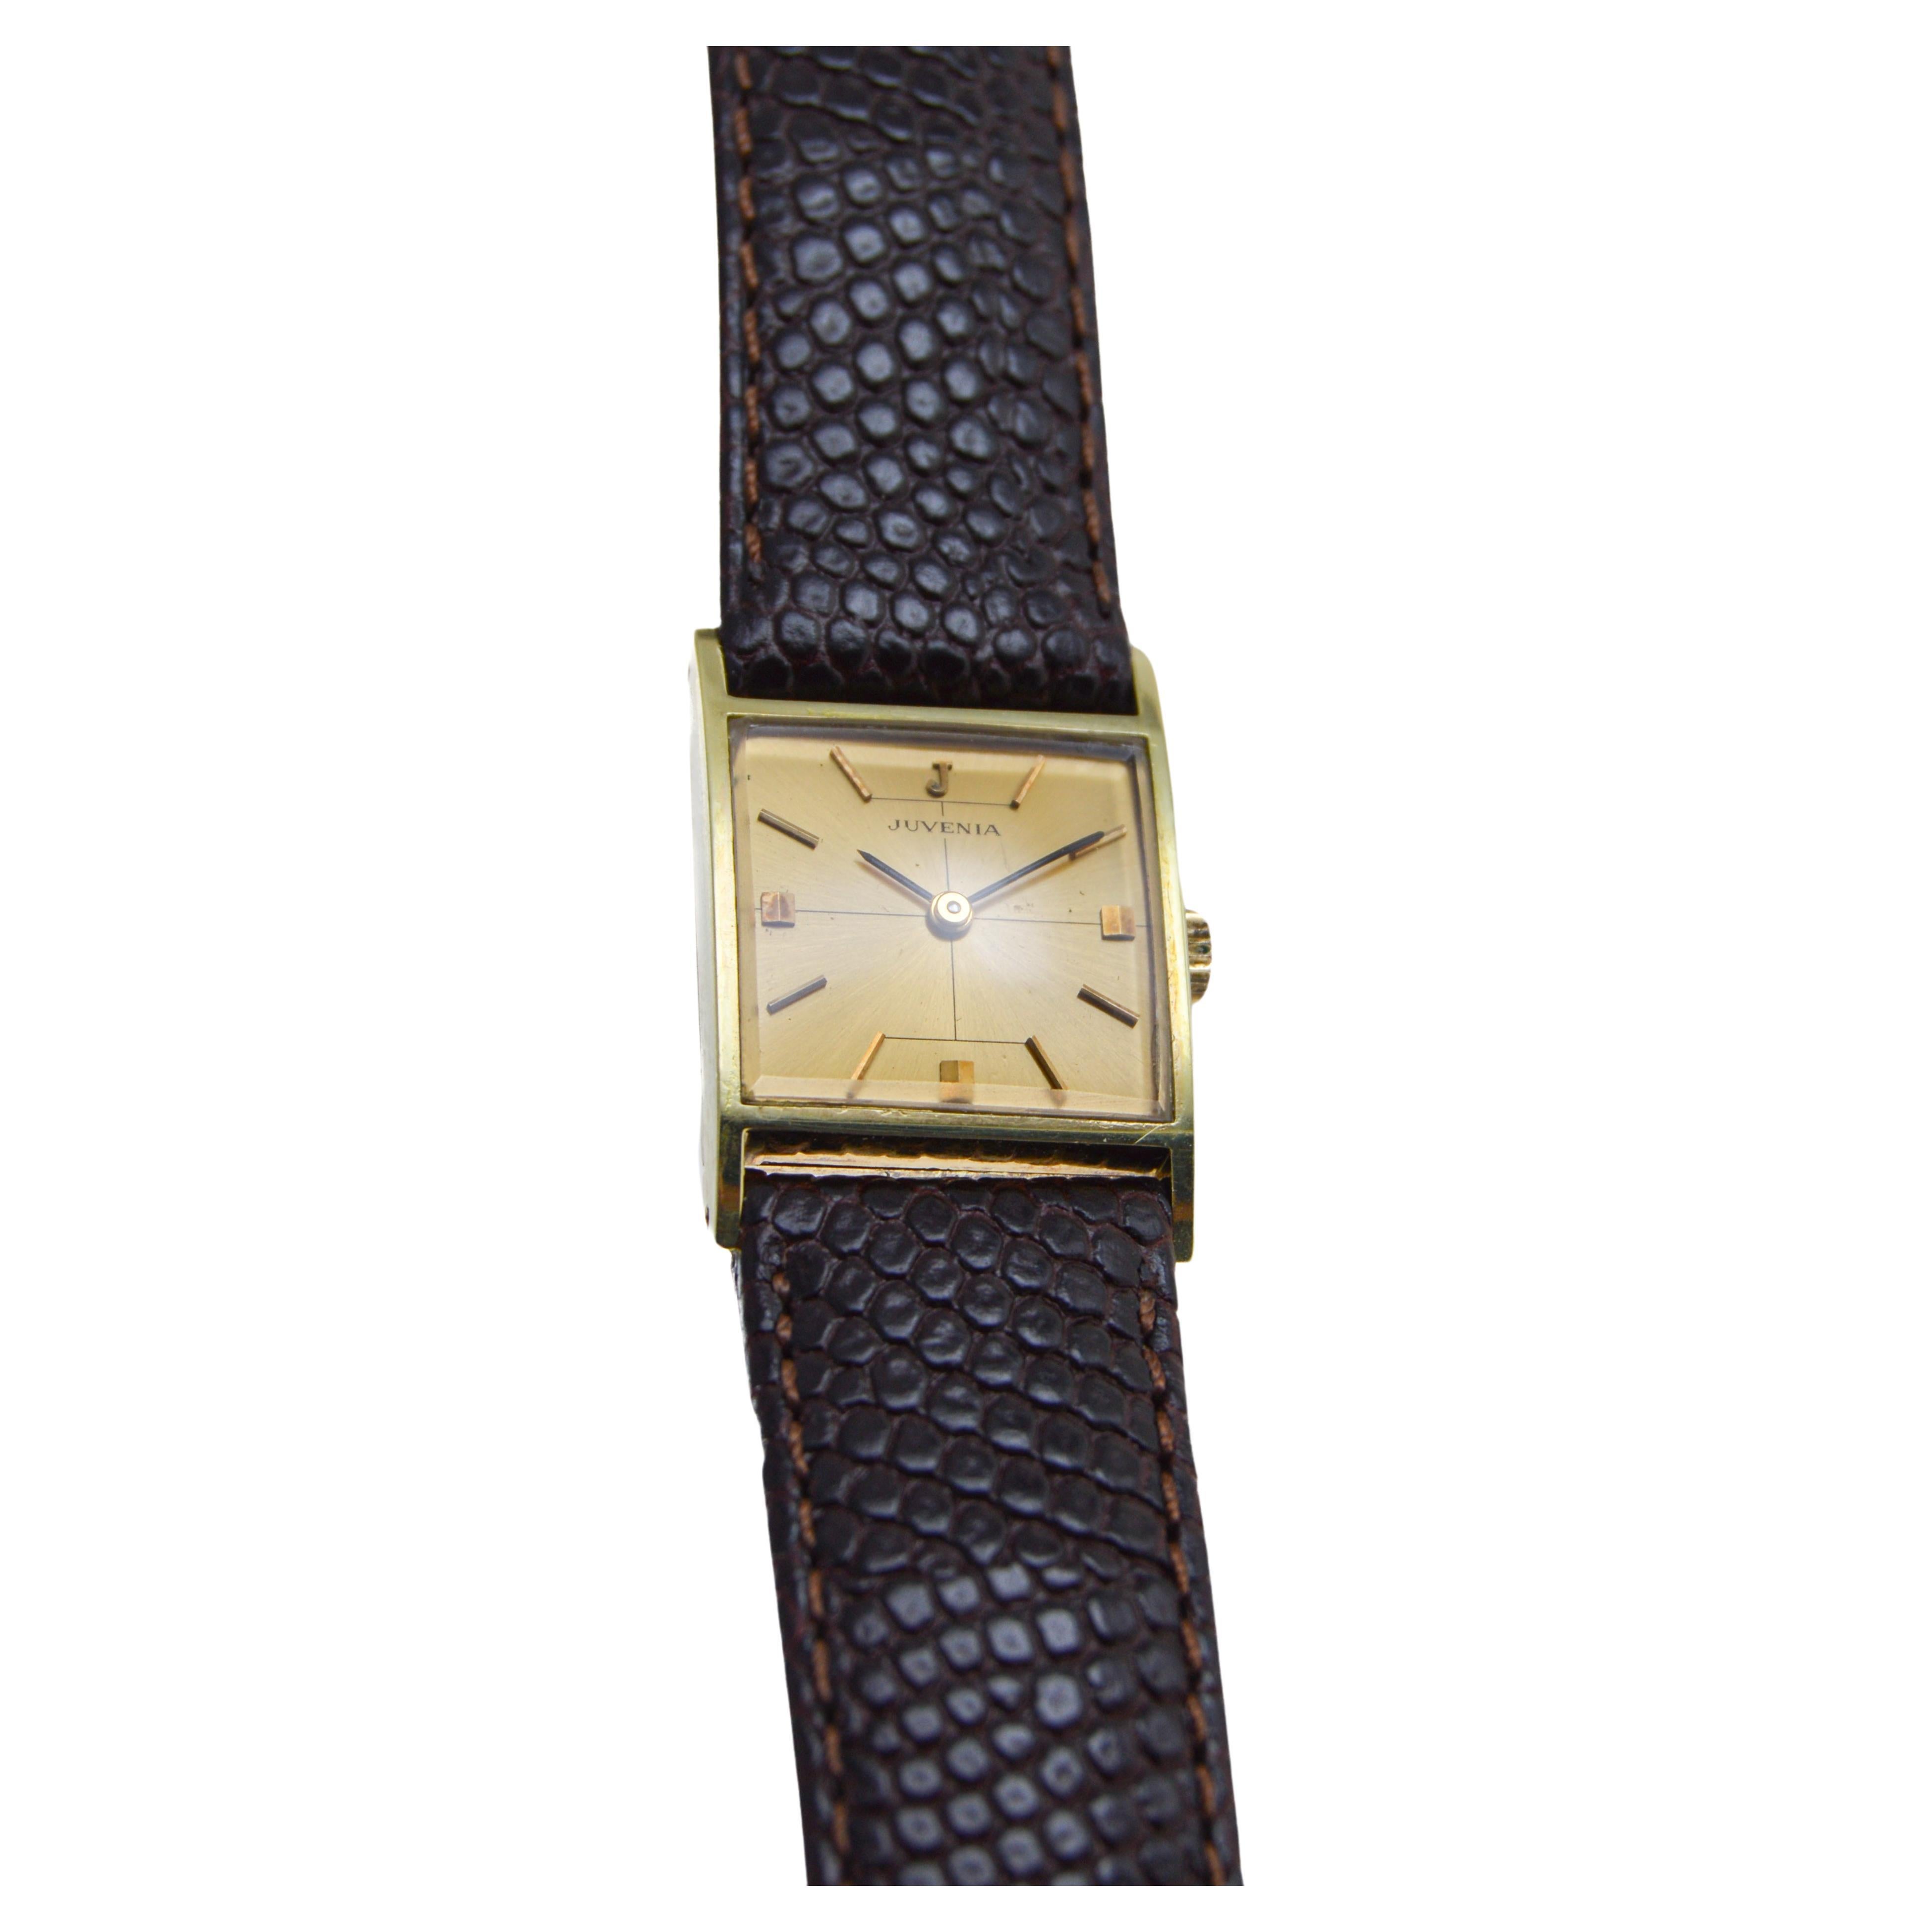 Juvenia Gold-Filled Art Deco Tank Style Watch from 1950's High Grade In Excellent Condition For Sale In Long Beach, CA